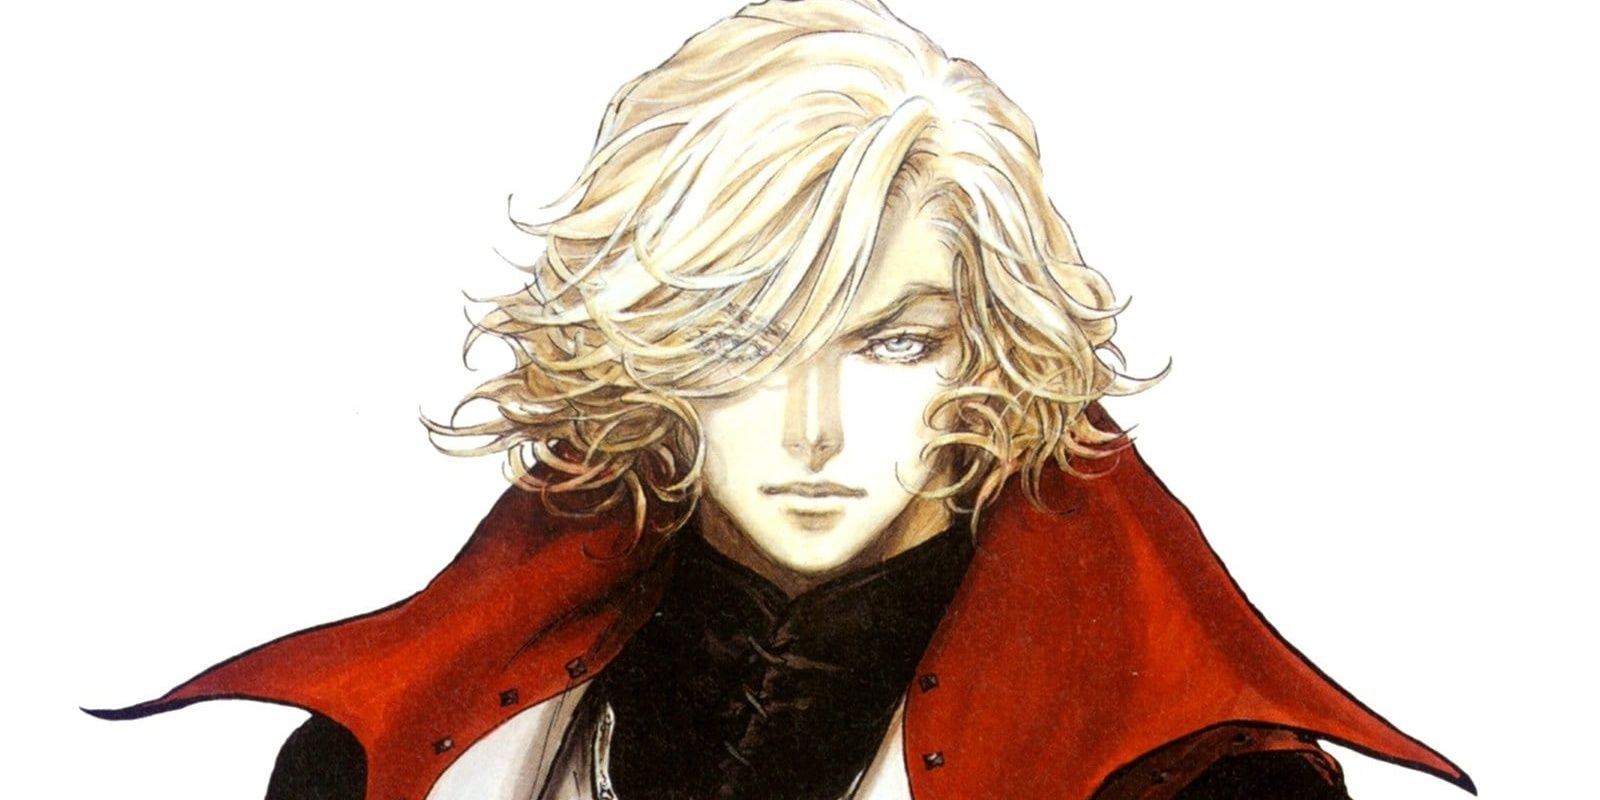 Leon Belmont, the founder of Belmont clan from Castlevania